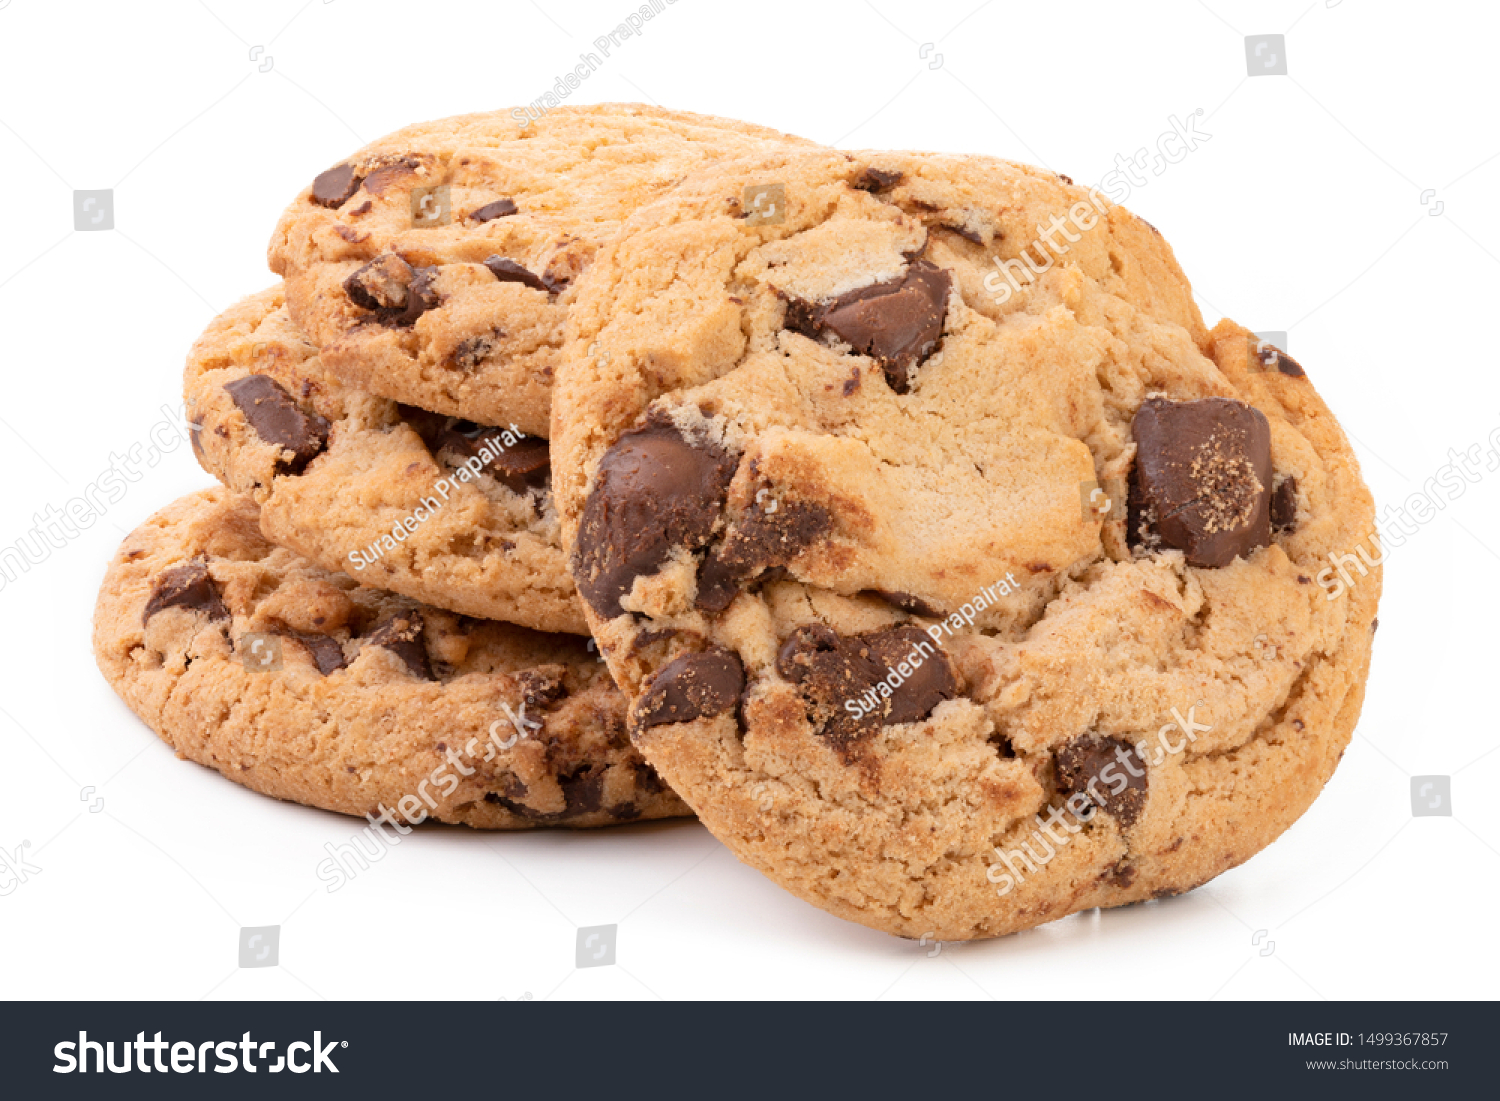 Chocolate chip cookies isolated on white background, Homemad cookies close up. #1499367857